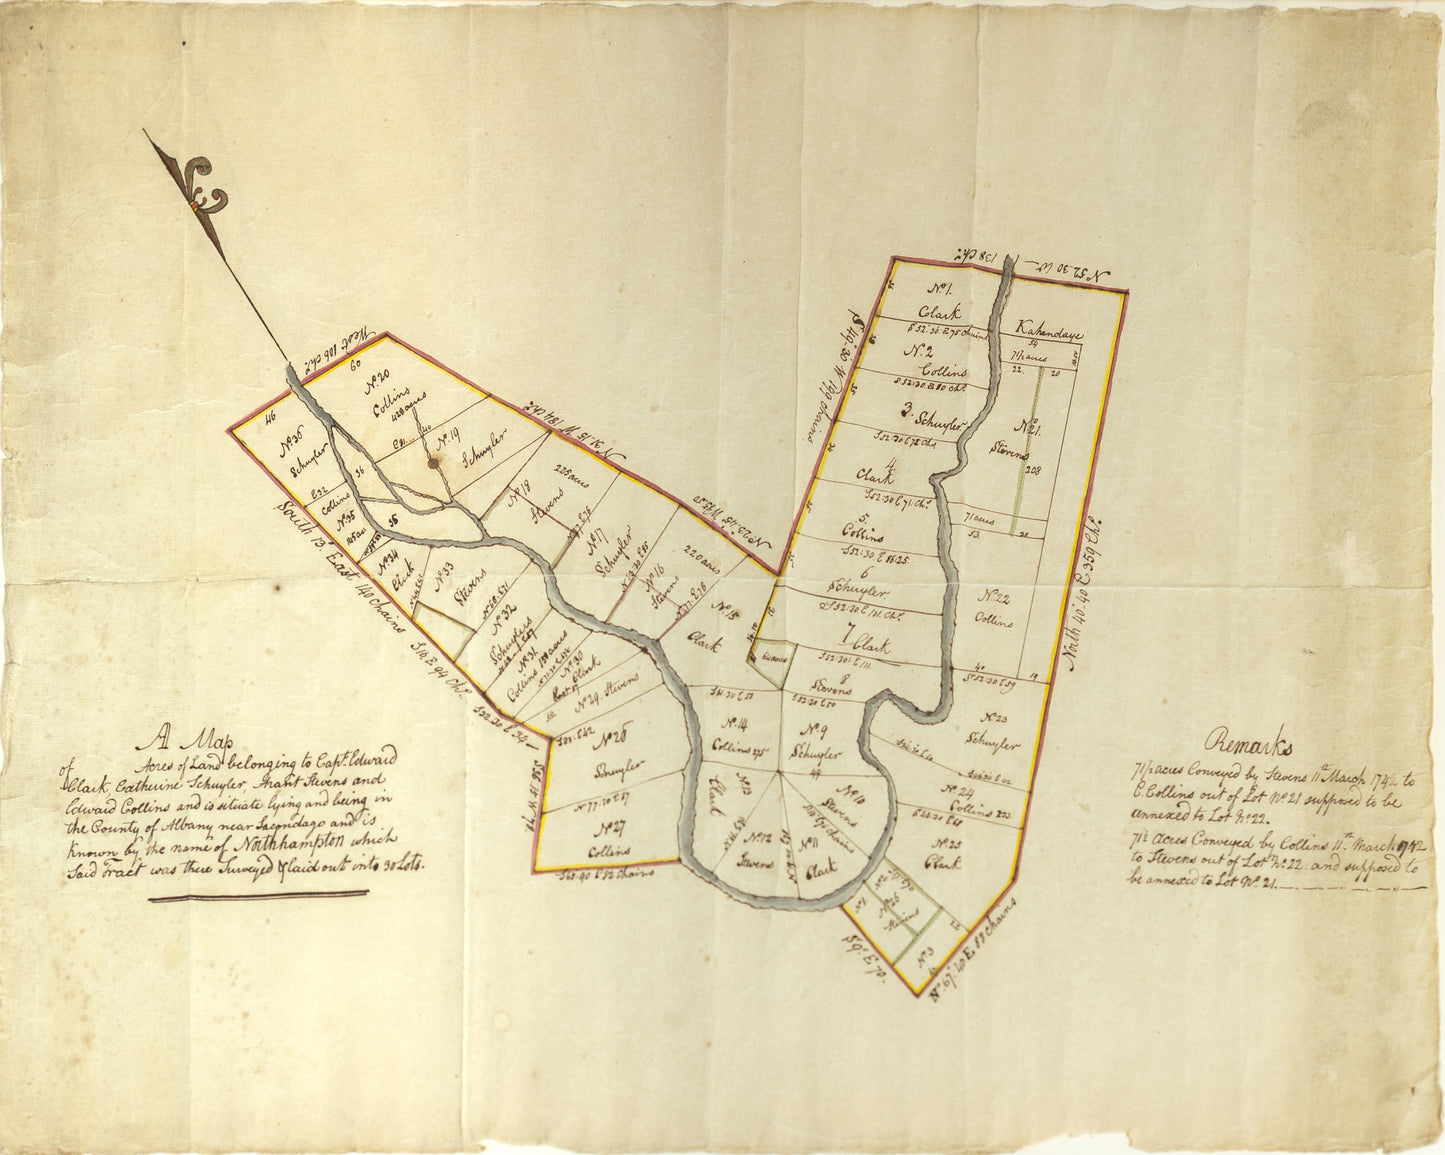 A Map: Acres of Land belonging to Capt. Edward Clark, Catherine Schuyler, Arant Stevens, and Edward Collins. Albany, 1742. [Manuscript map of Albany]